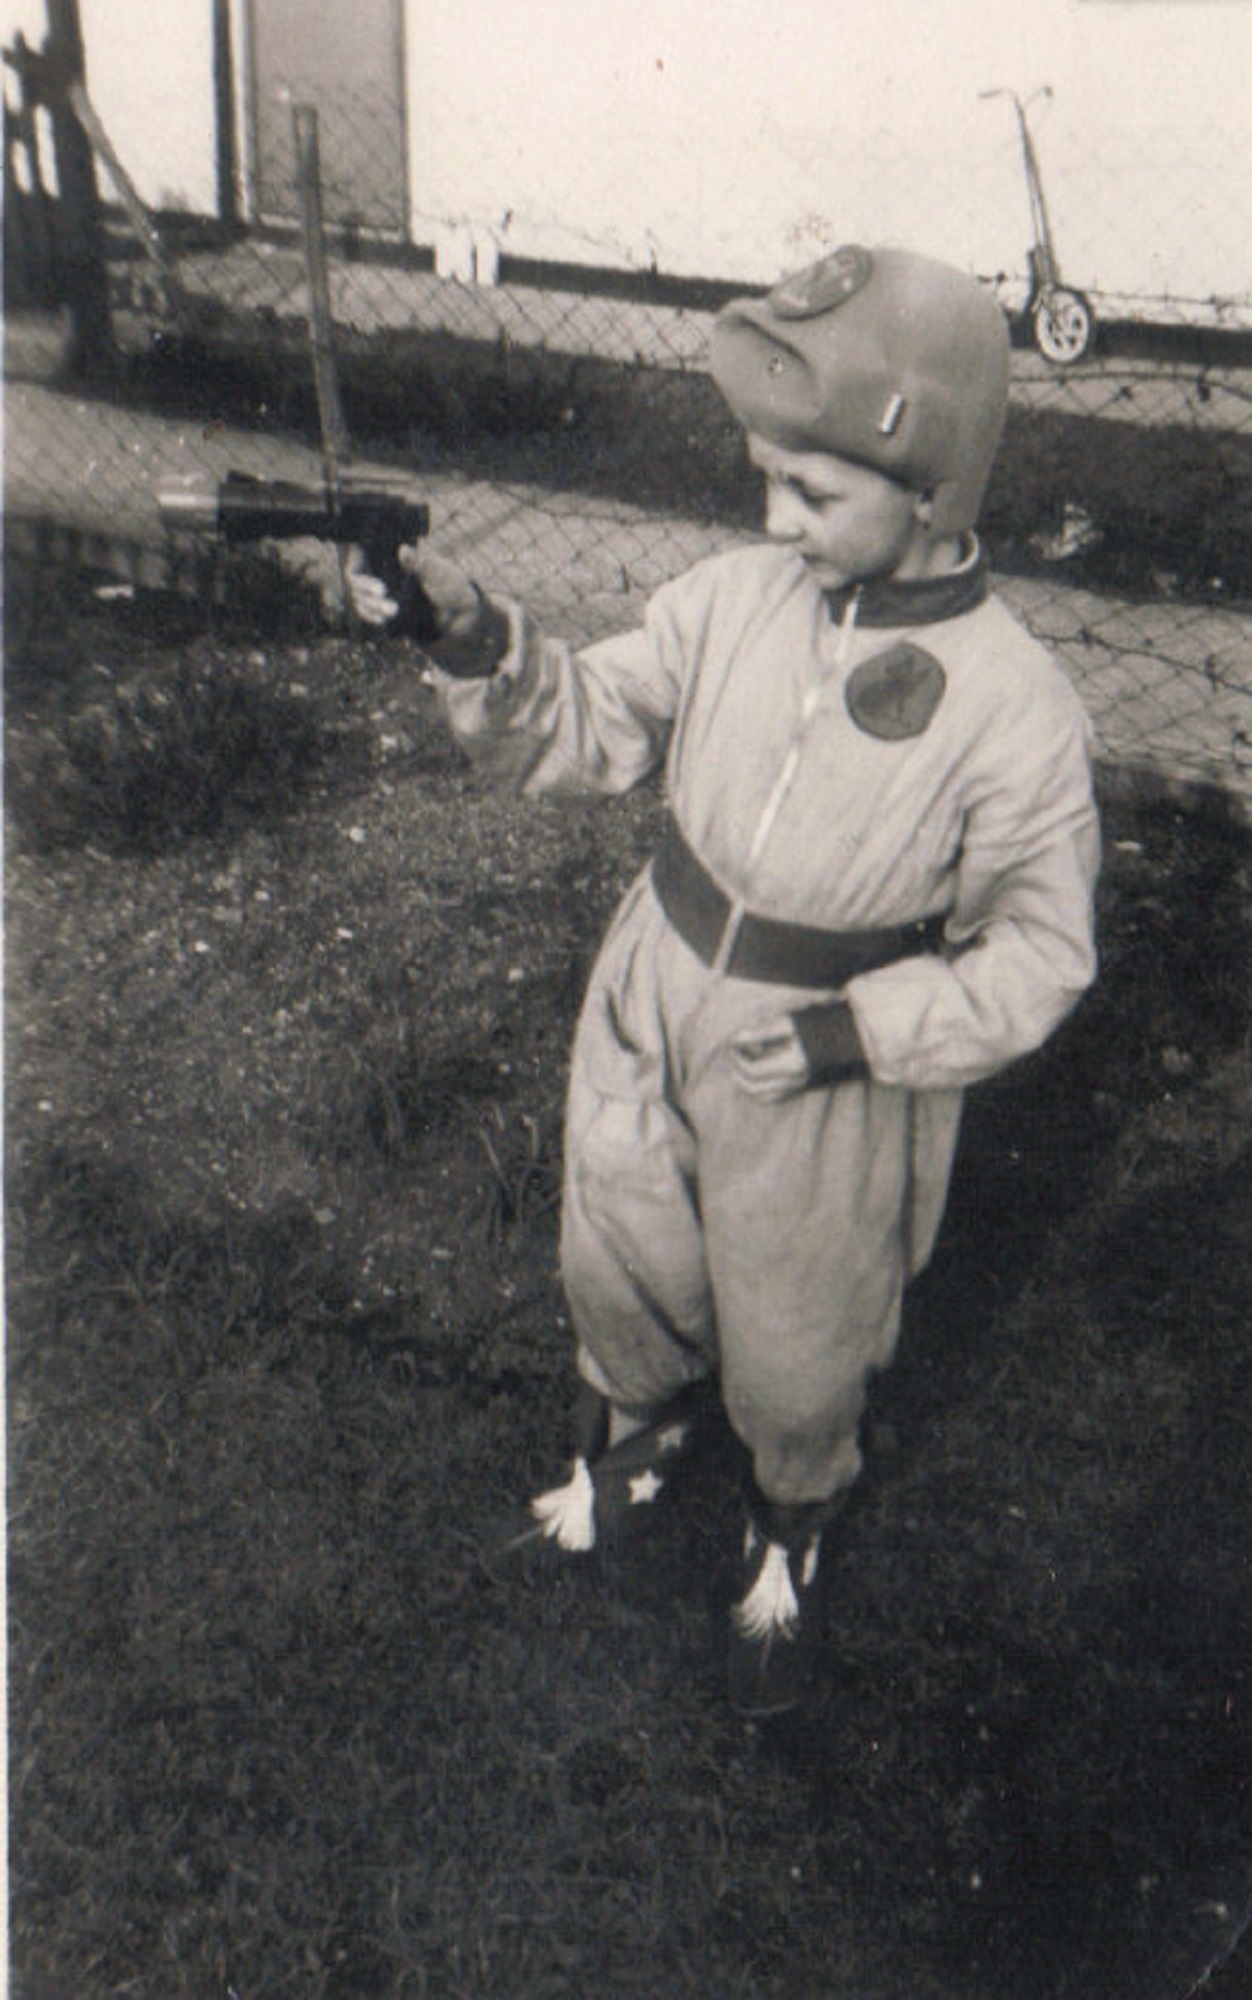 Terence dressed as a spaceman outside his prefab, Dartmouth Park Hill, London N19